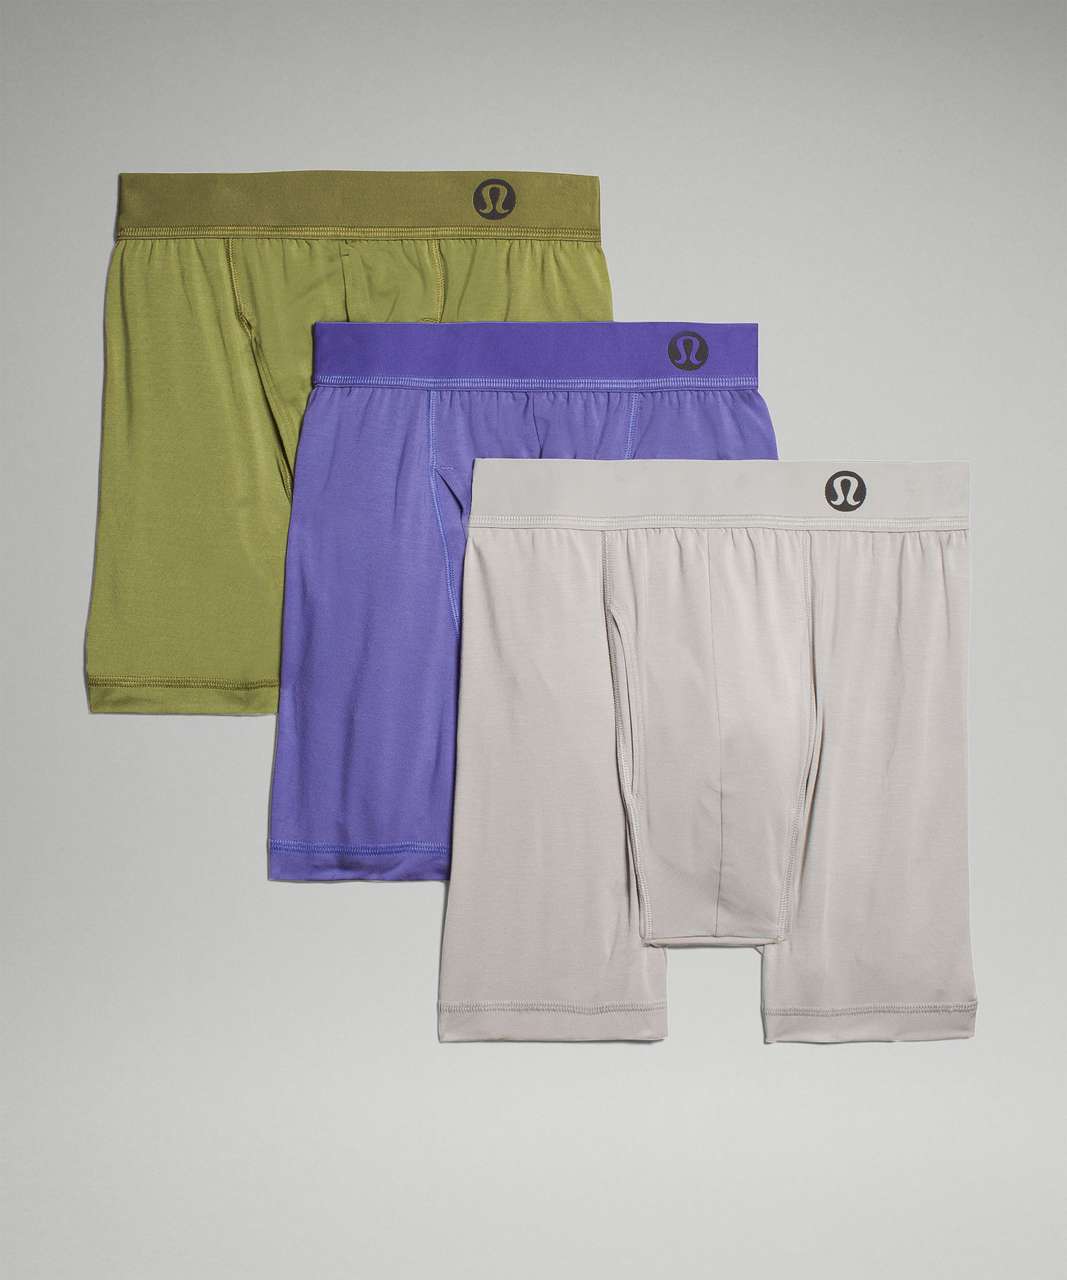 Lululemon Always In Motion Boxer with Fly 3 Pack - Charged Indigo / Bronze Green / Seal Grey